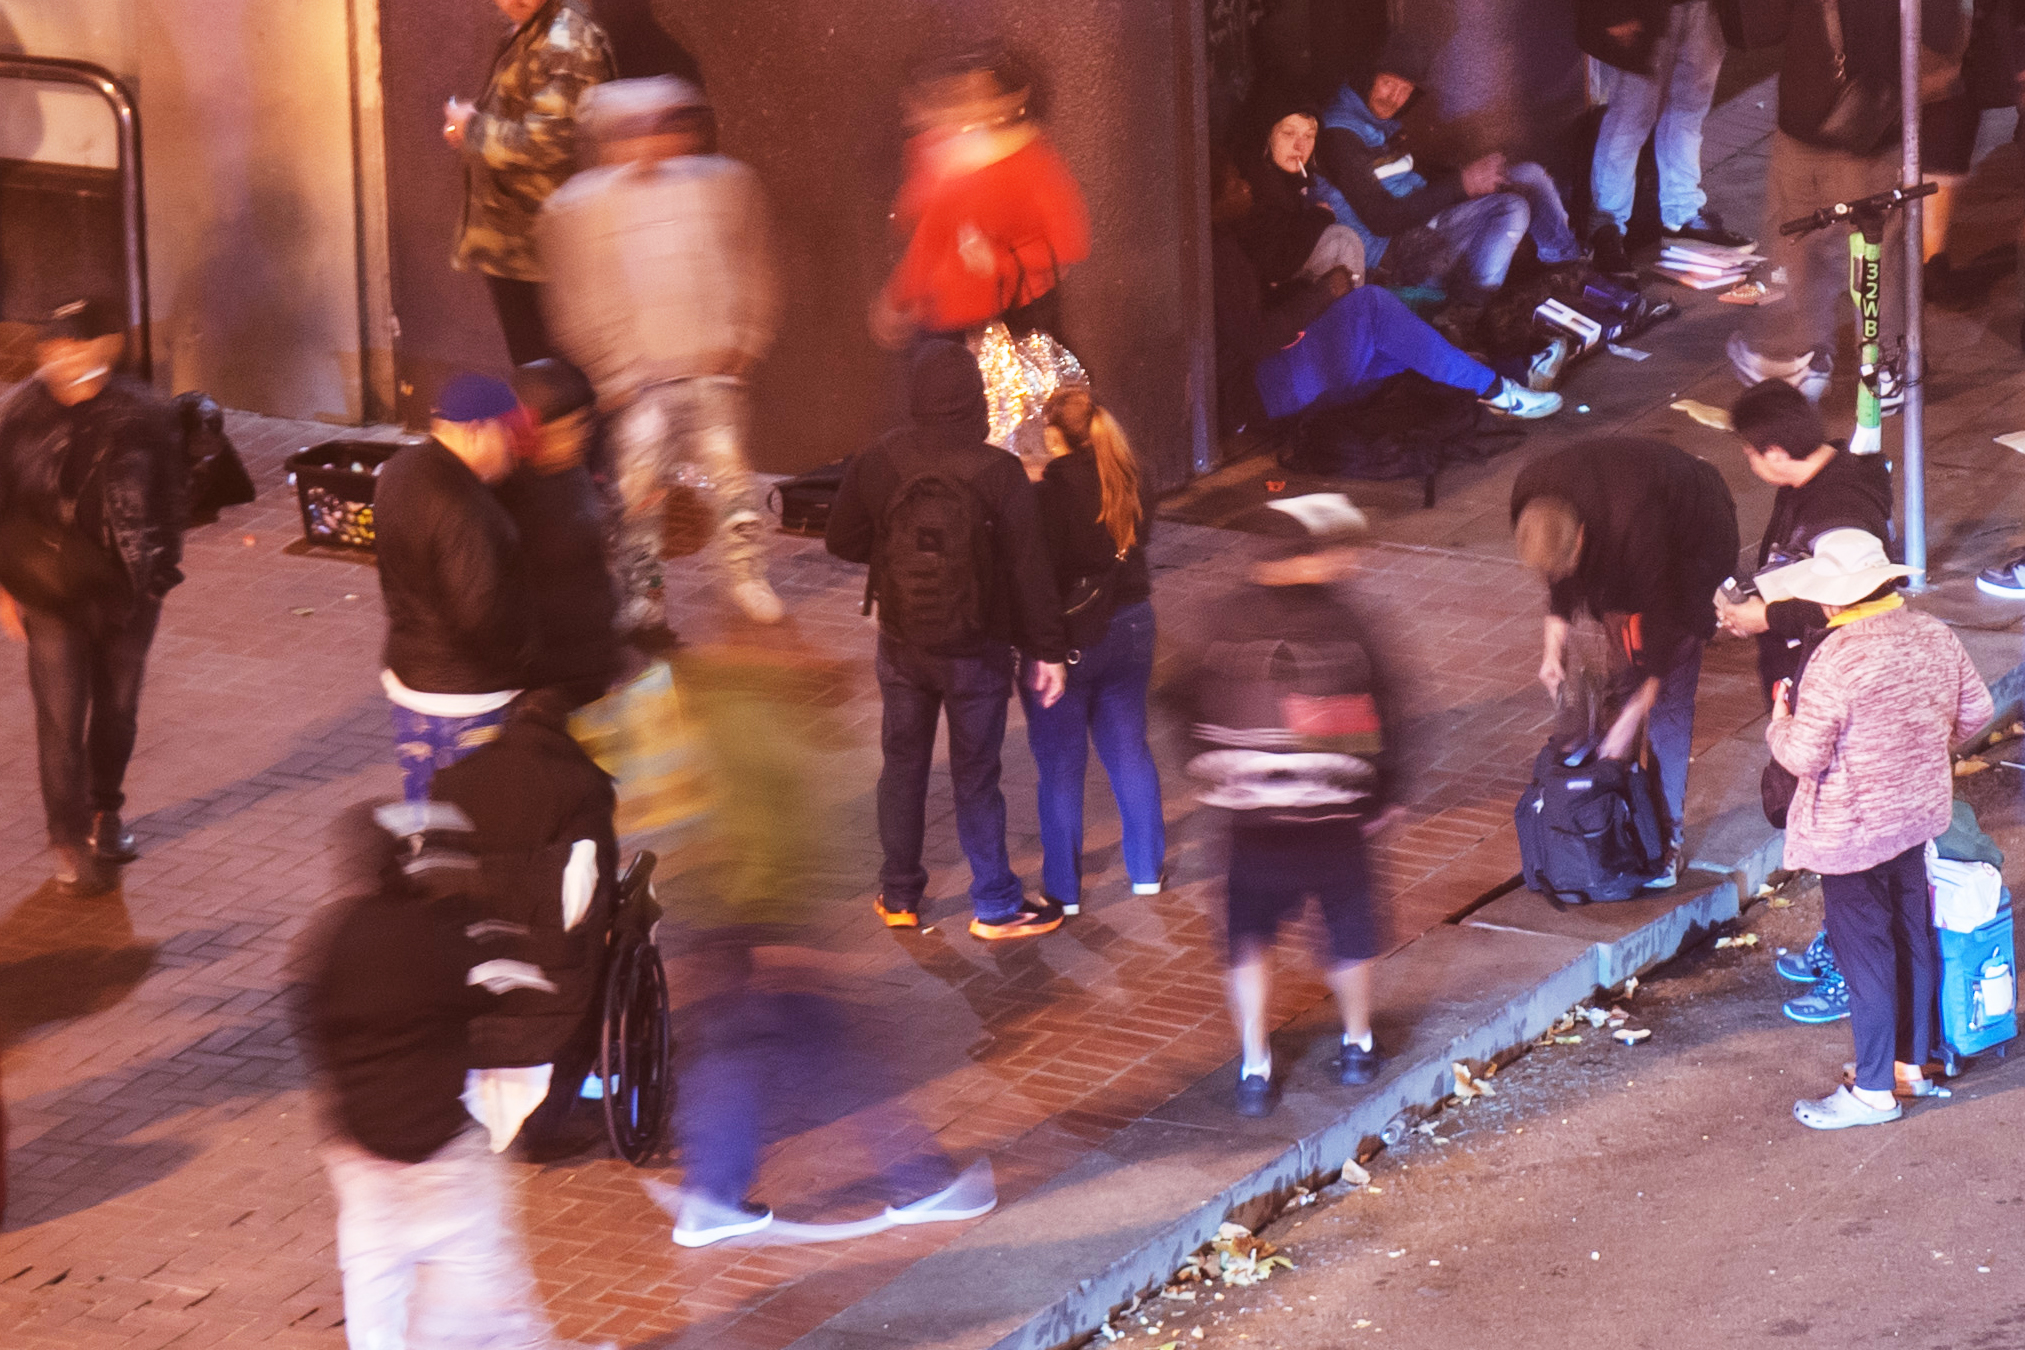 A street scene of blurry figures at night in downtown San Francisco. The area is know for drugs and homelessness.